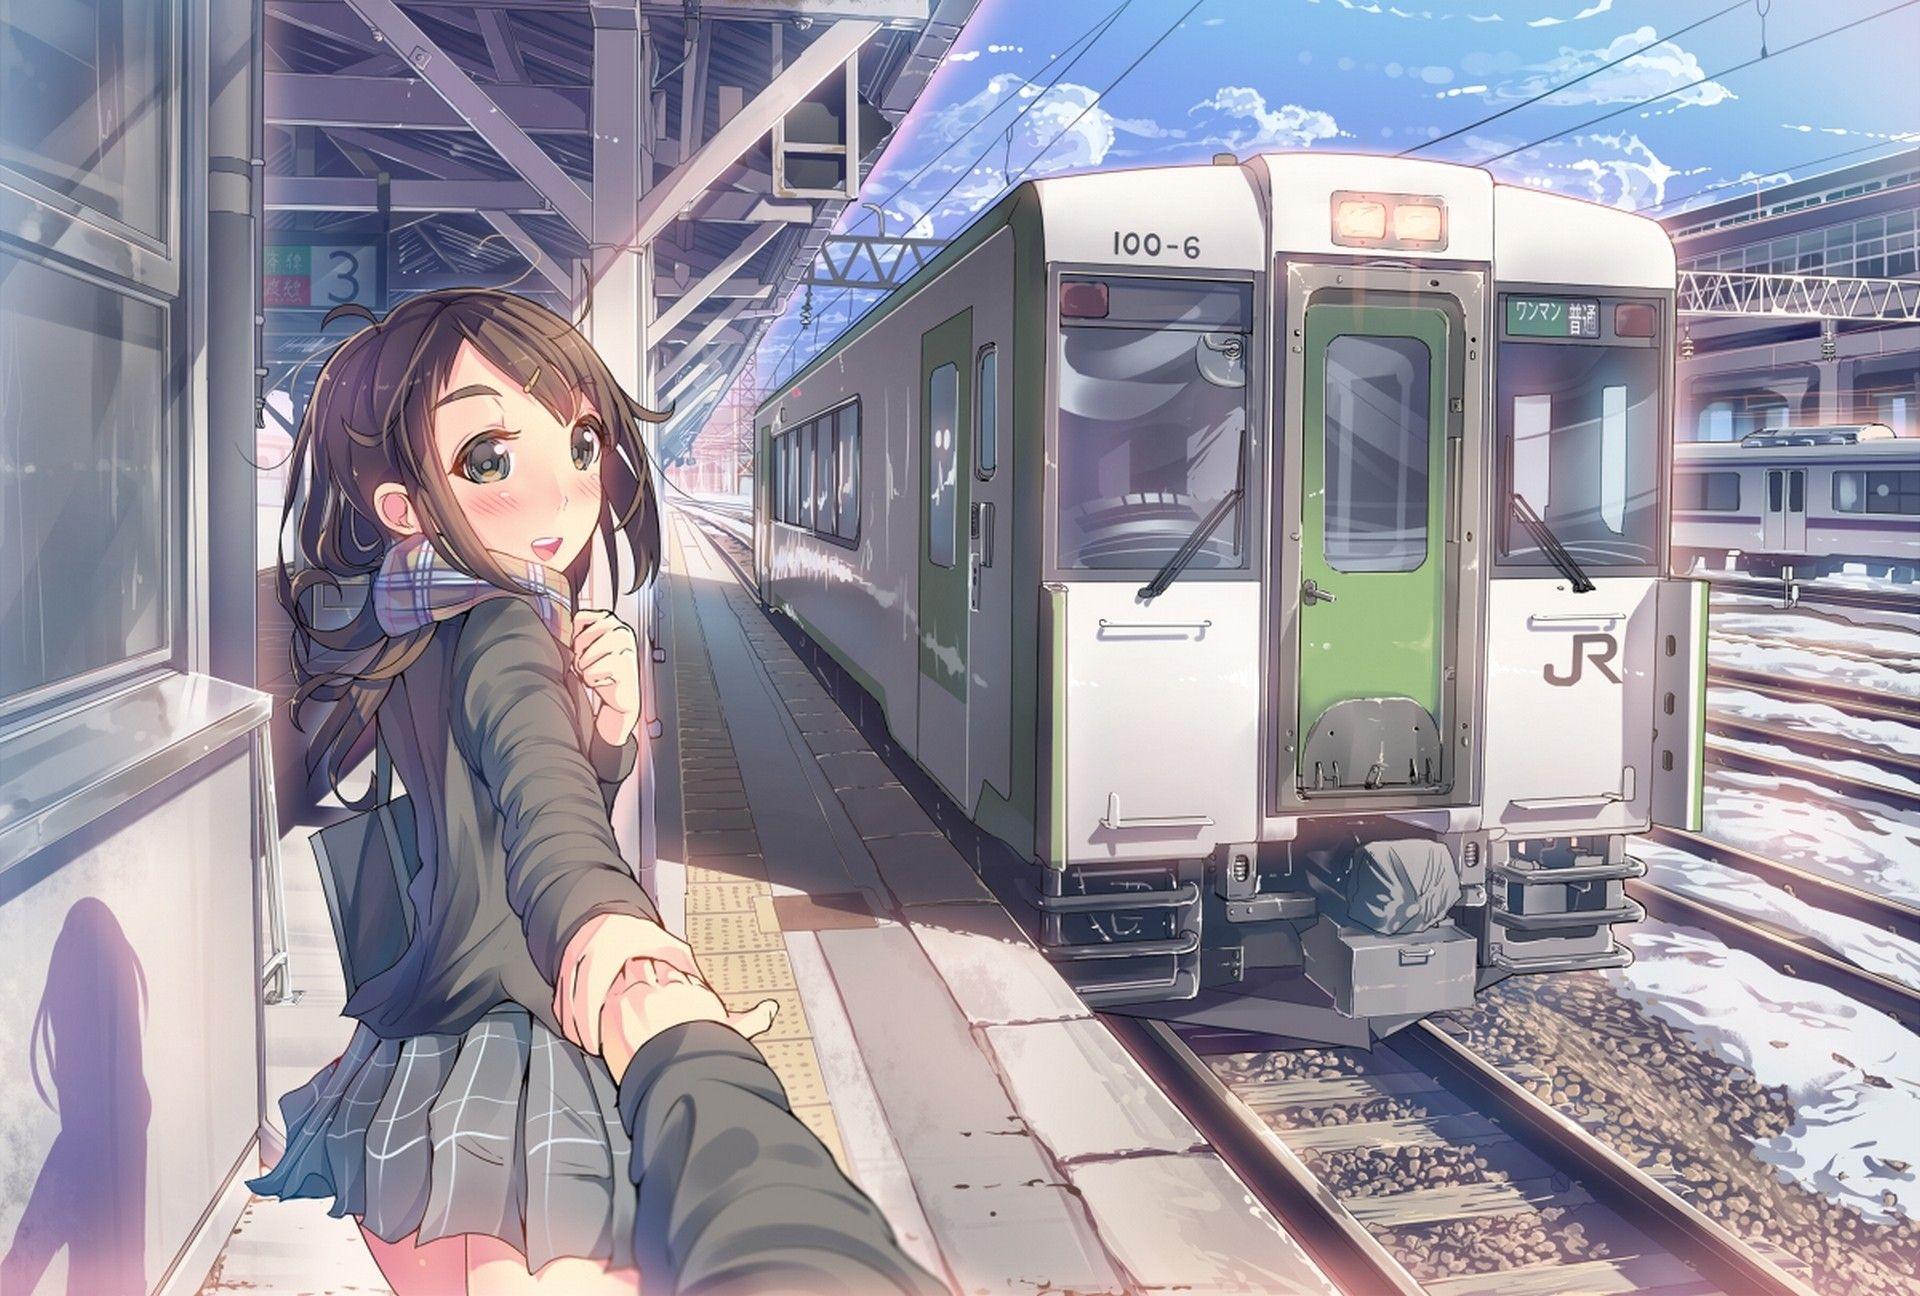 Anime Train Wallpapers Top Free Anime Train Backgrounds Wallpaperaccess Train watercolor original painting art countryside picture illustration anime background aesthetic landscape colorful painting vivid art. anime train wallpapers top free anime